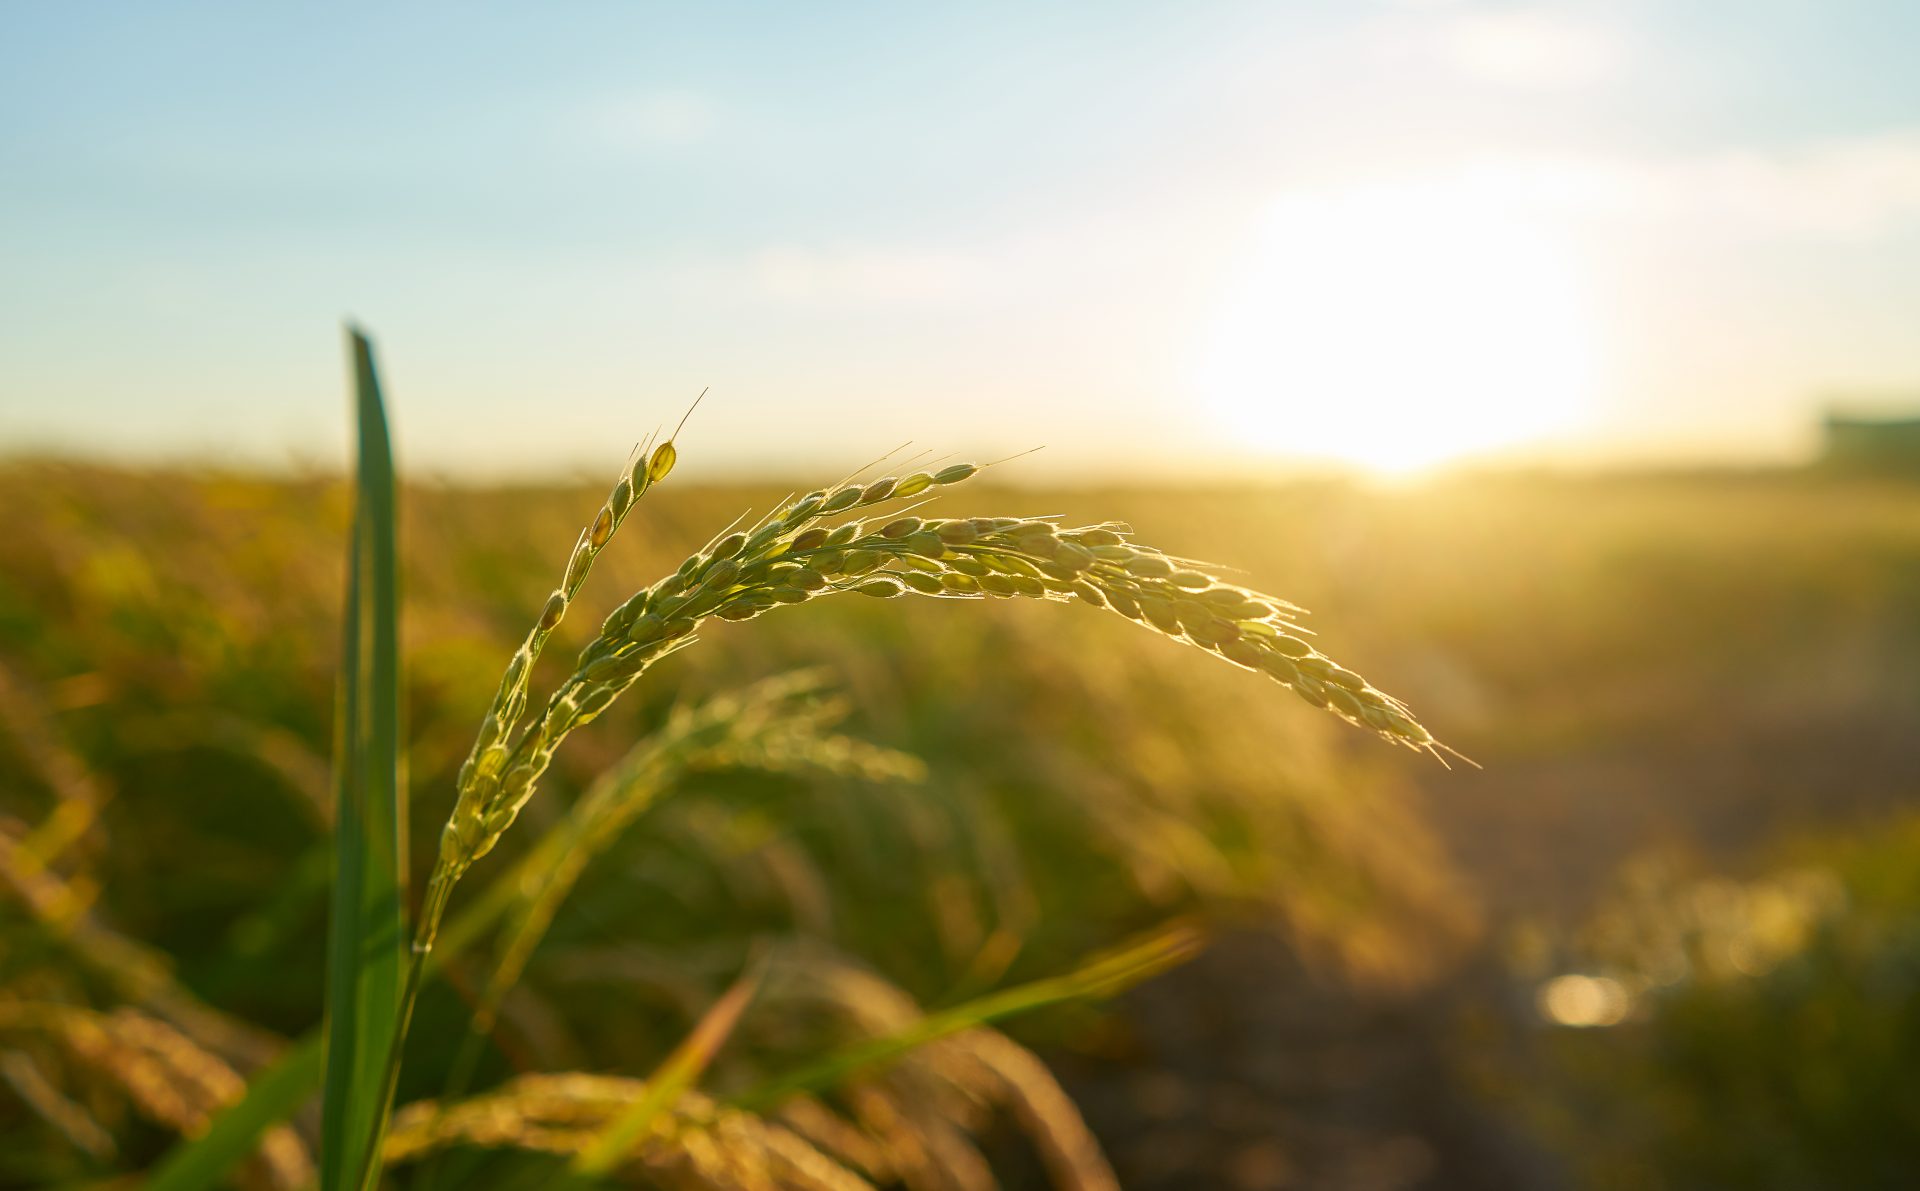 detail-of-the-rice-plant-at-sunset-in-valencia-with-the-plantation-out-of-focus-rice-grains-in-plant-seed